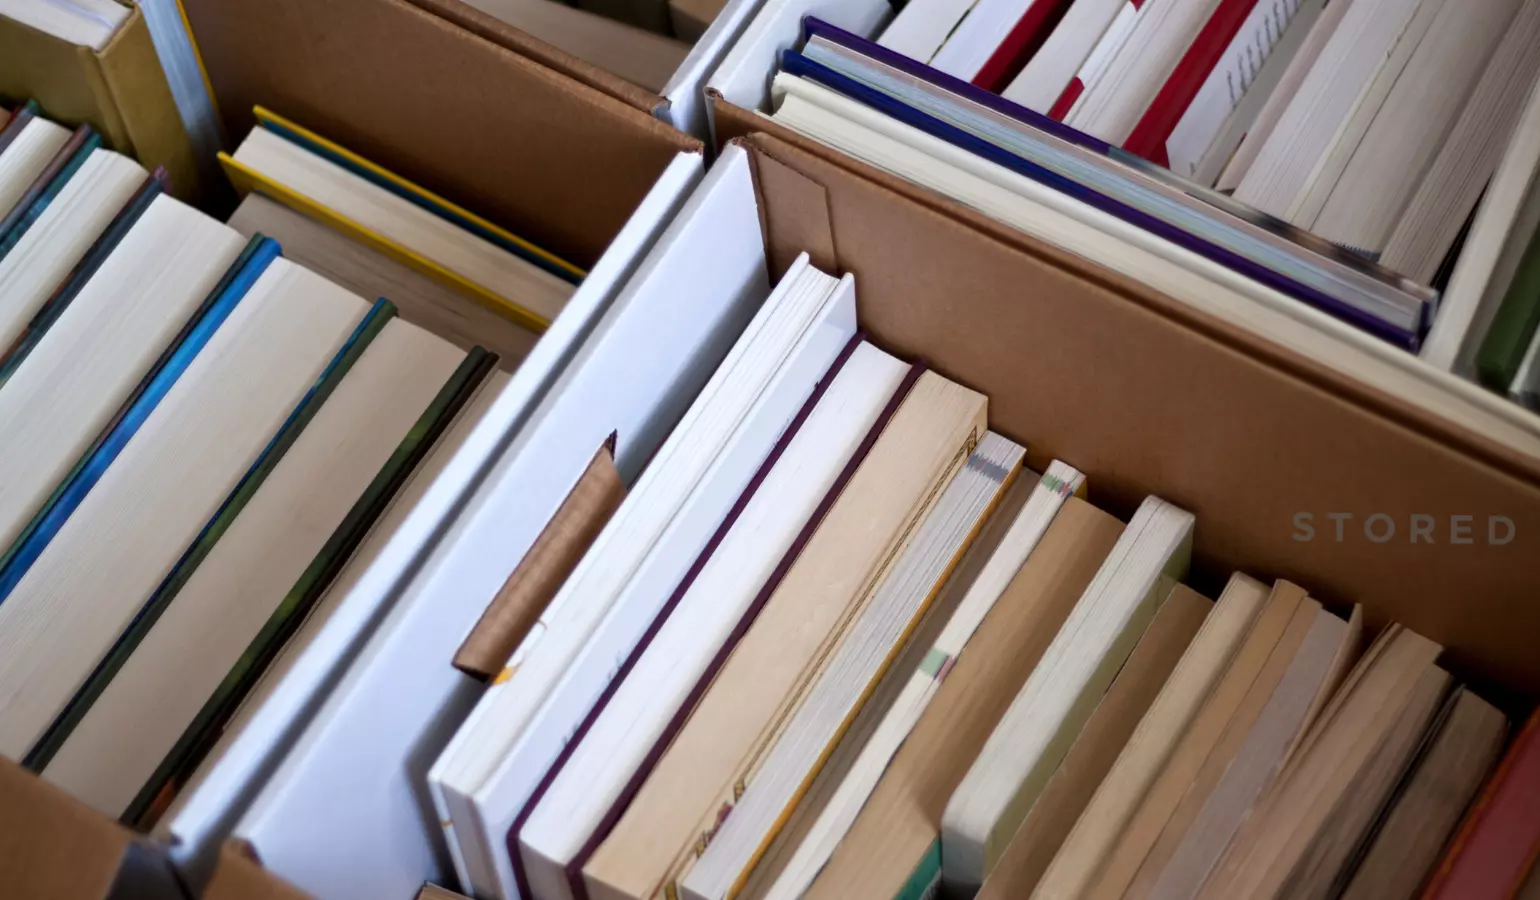 The Handiest Tips for Packing and Storing Books